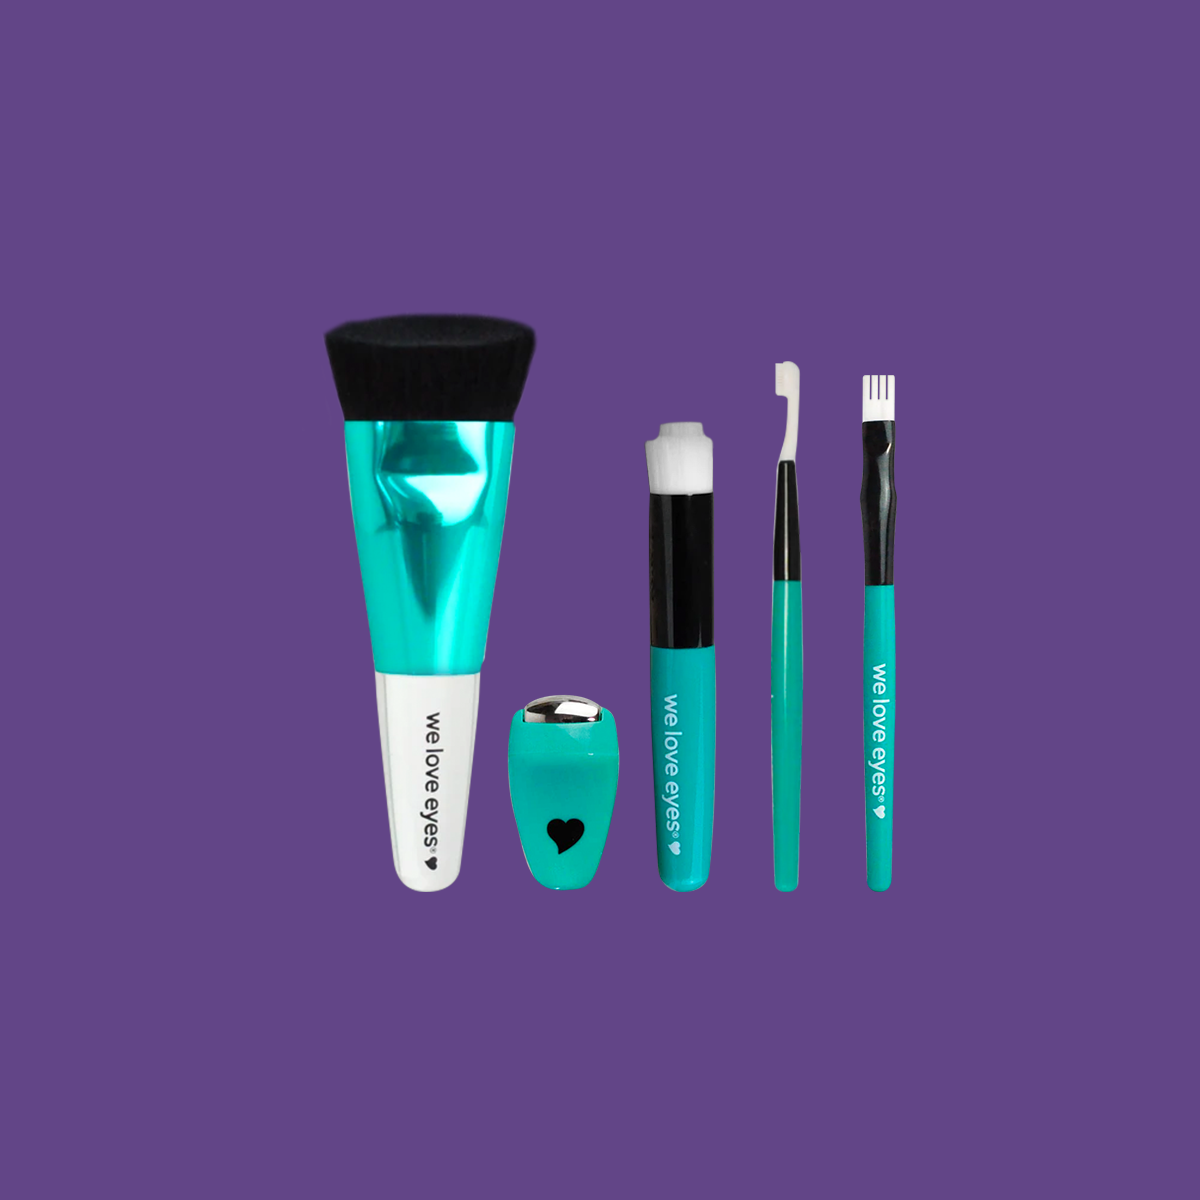 We Love Eyes Complete Toolkit for Eyelashes